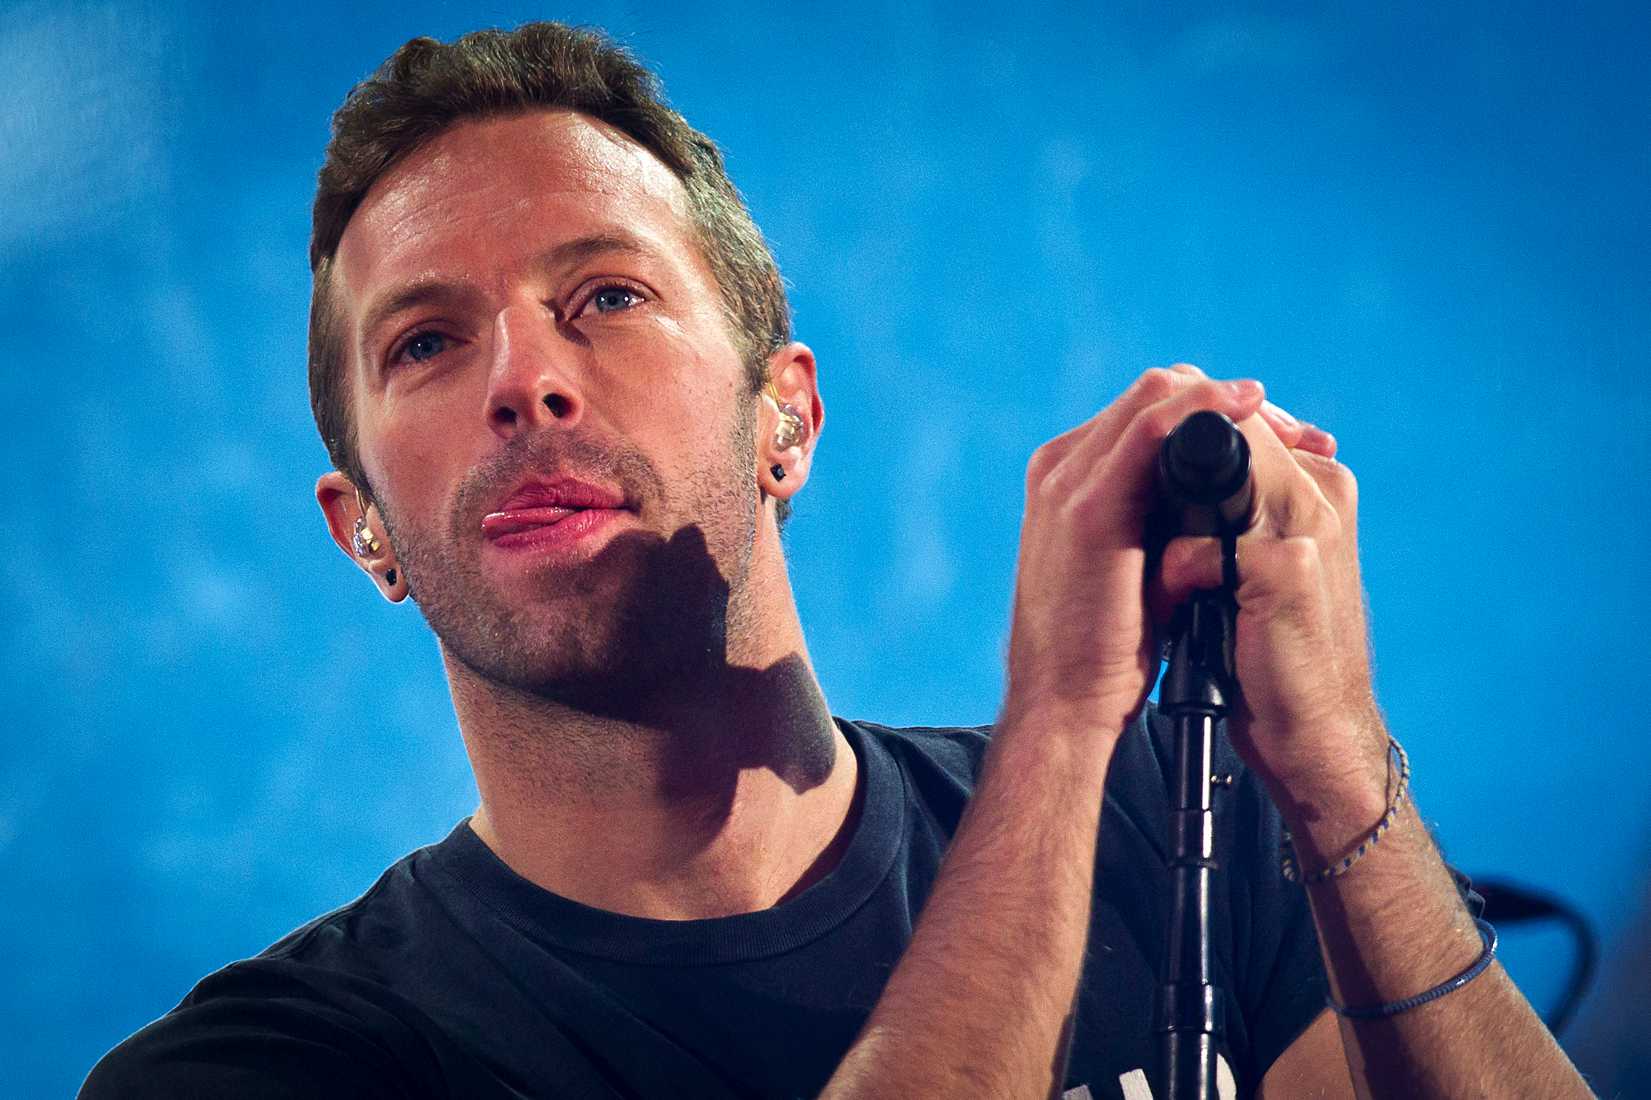 Chris Martin performs with U2 during a surprise concert in support of World AIDS Day in Times Square in New York City on Dec. 1, 2014 (Carlo Allegri—Reuters)